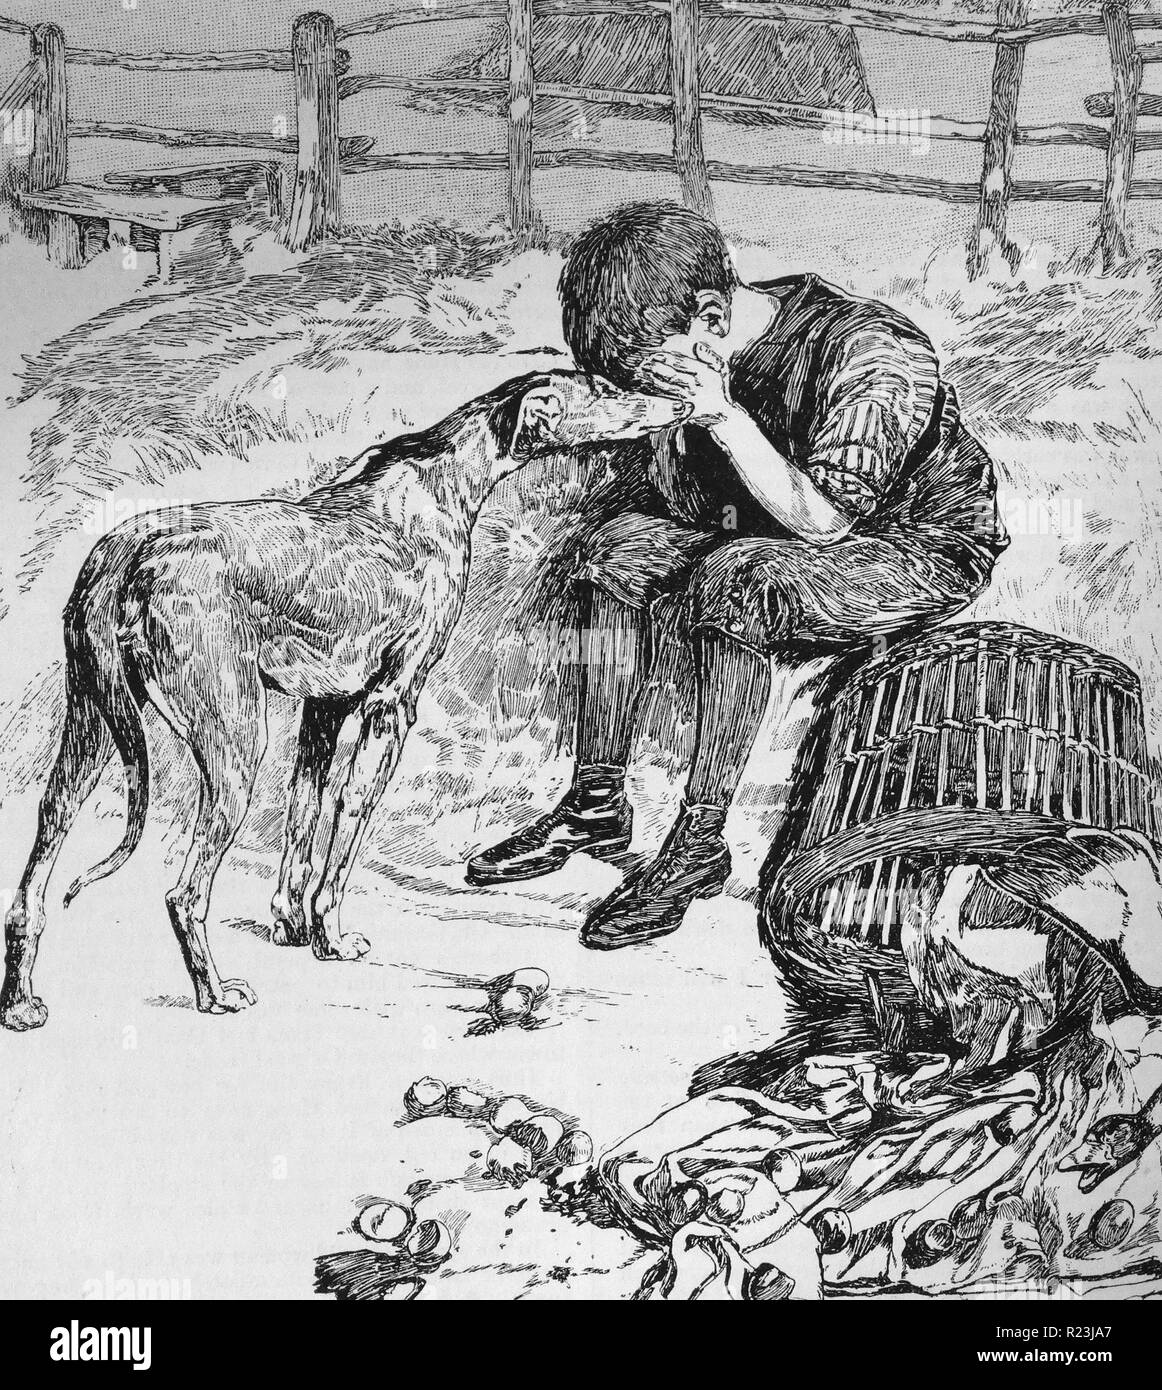 Illustration from a book depicting a young orphan boy and stray dog. The boys is sat weeping at the loss of his produce, whilst the dog affectingly licks his hands. Dated 1913 Stock Photo